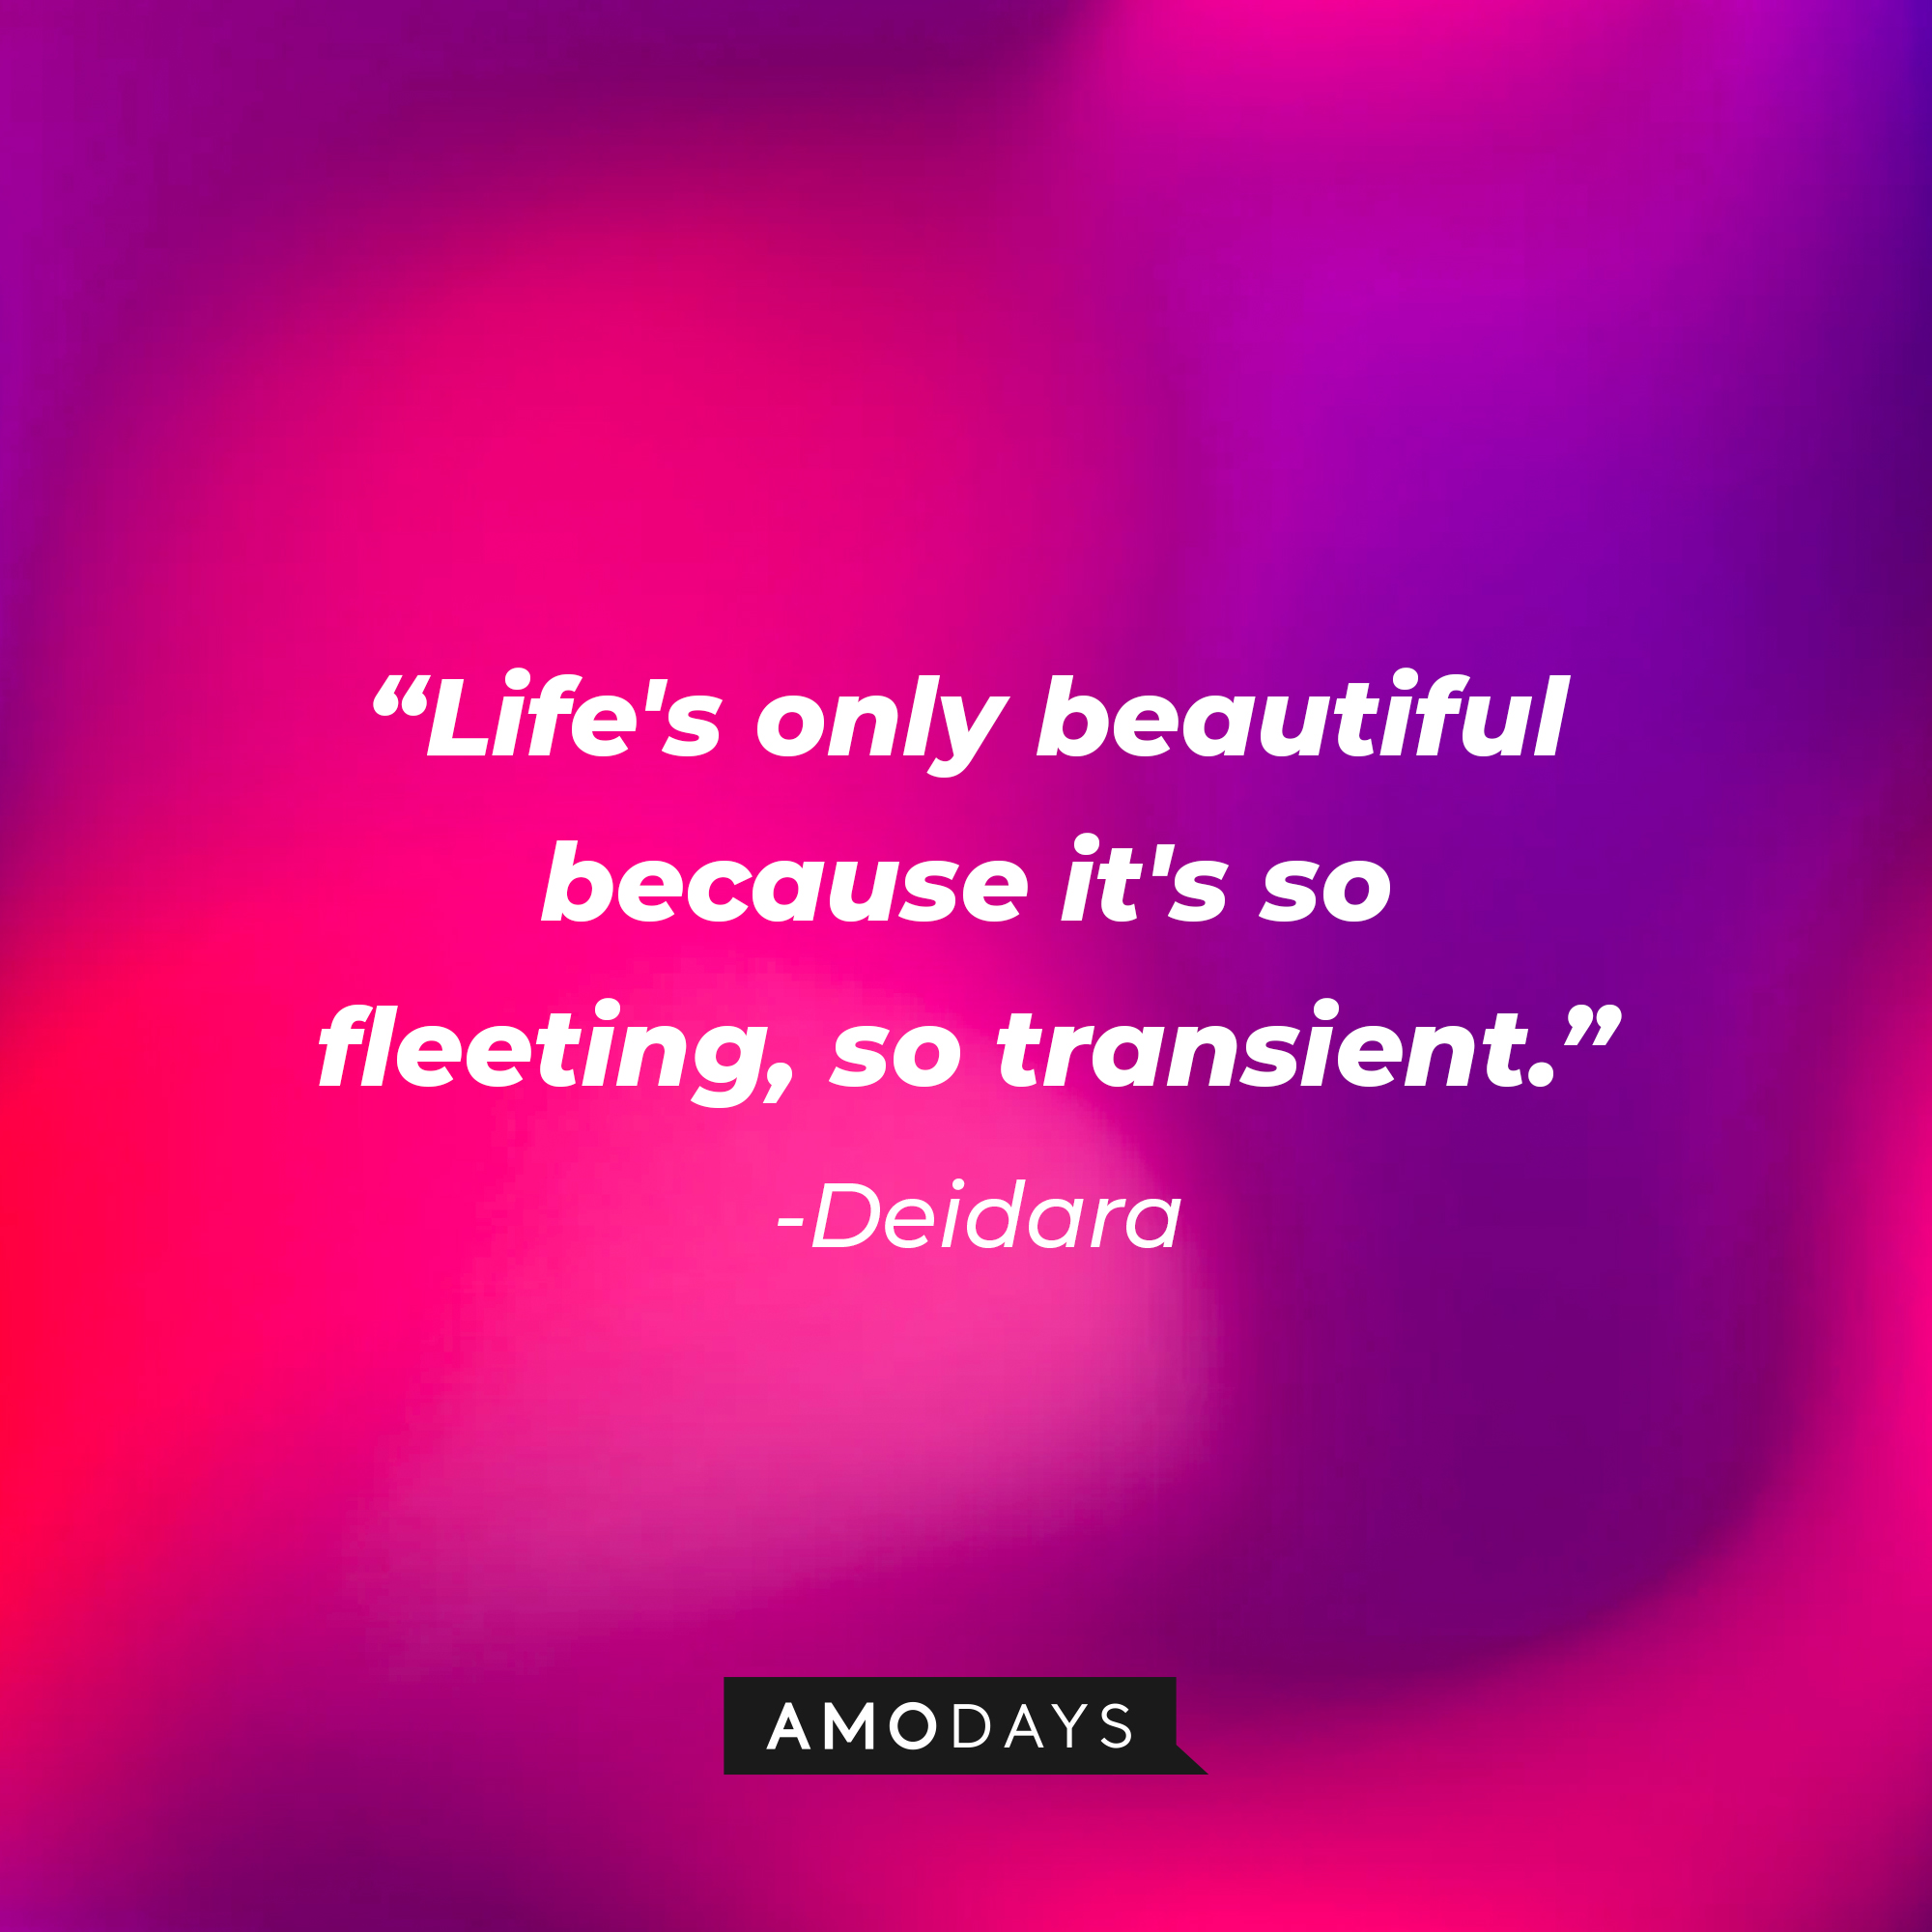 Deidara’s quote: "Life's only beautiful because it's so fleeting, so transient.” | Source: AmoDays